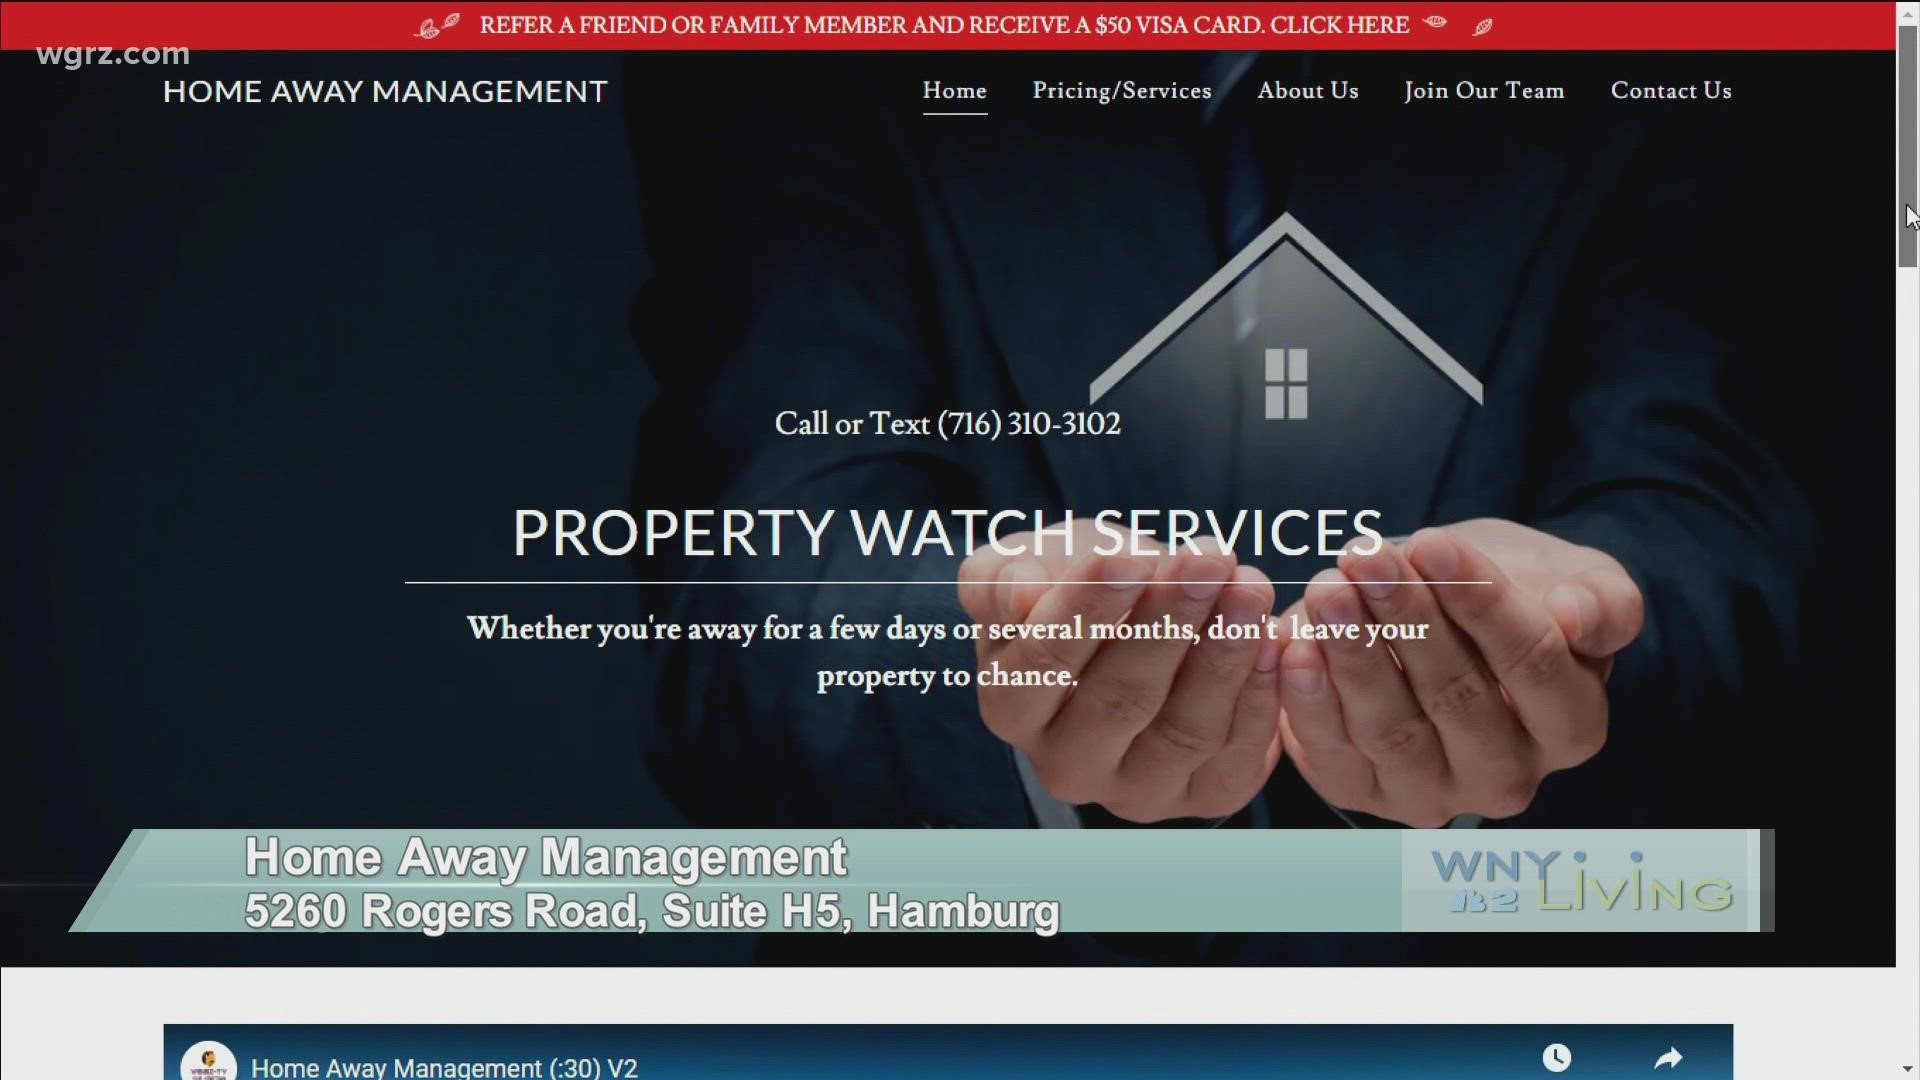 WNY Living - October 2 - Home Away Management (THIS VIDEO IS SPONSORED BY HOME AWAY MANAGEMENT)